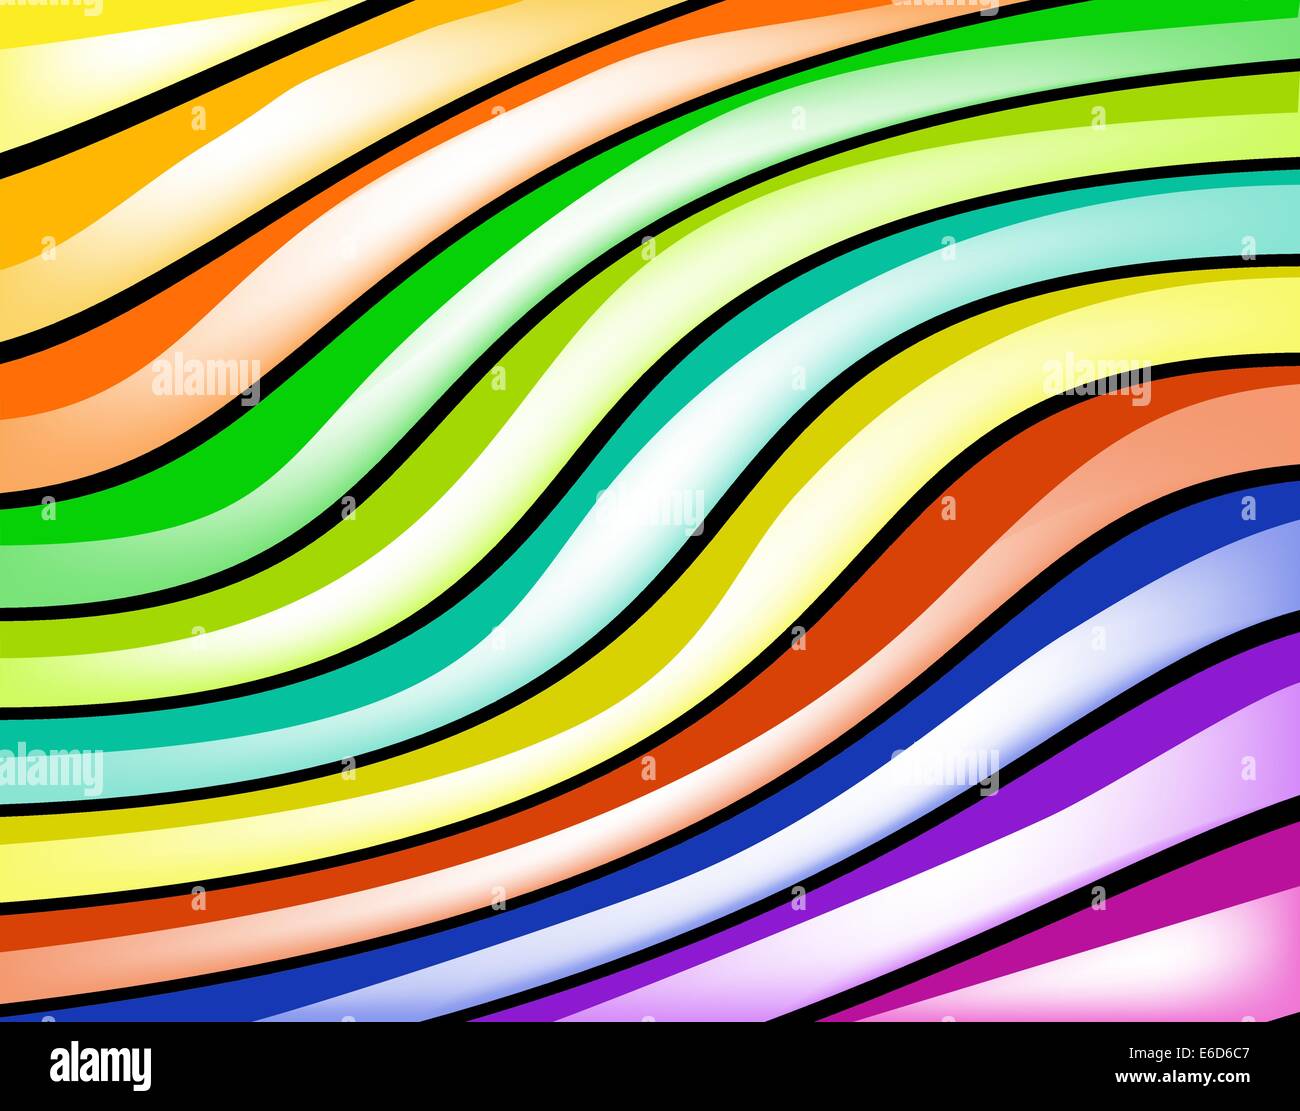 Abstract editable vector background design of colorful glossy stripes Stock Vector